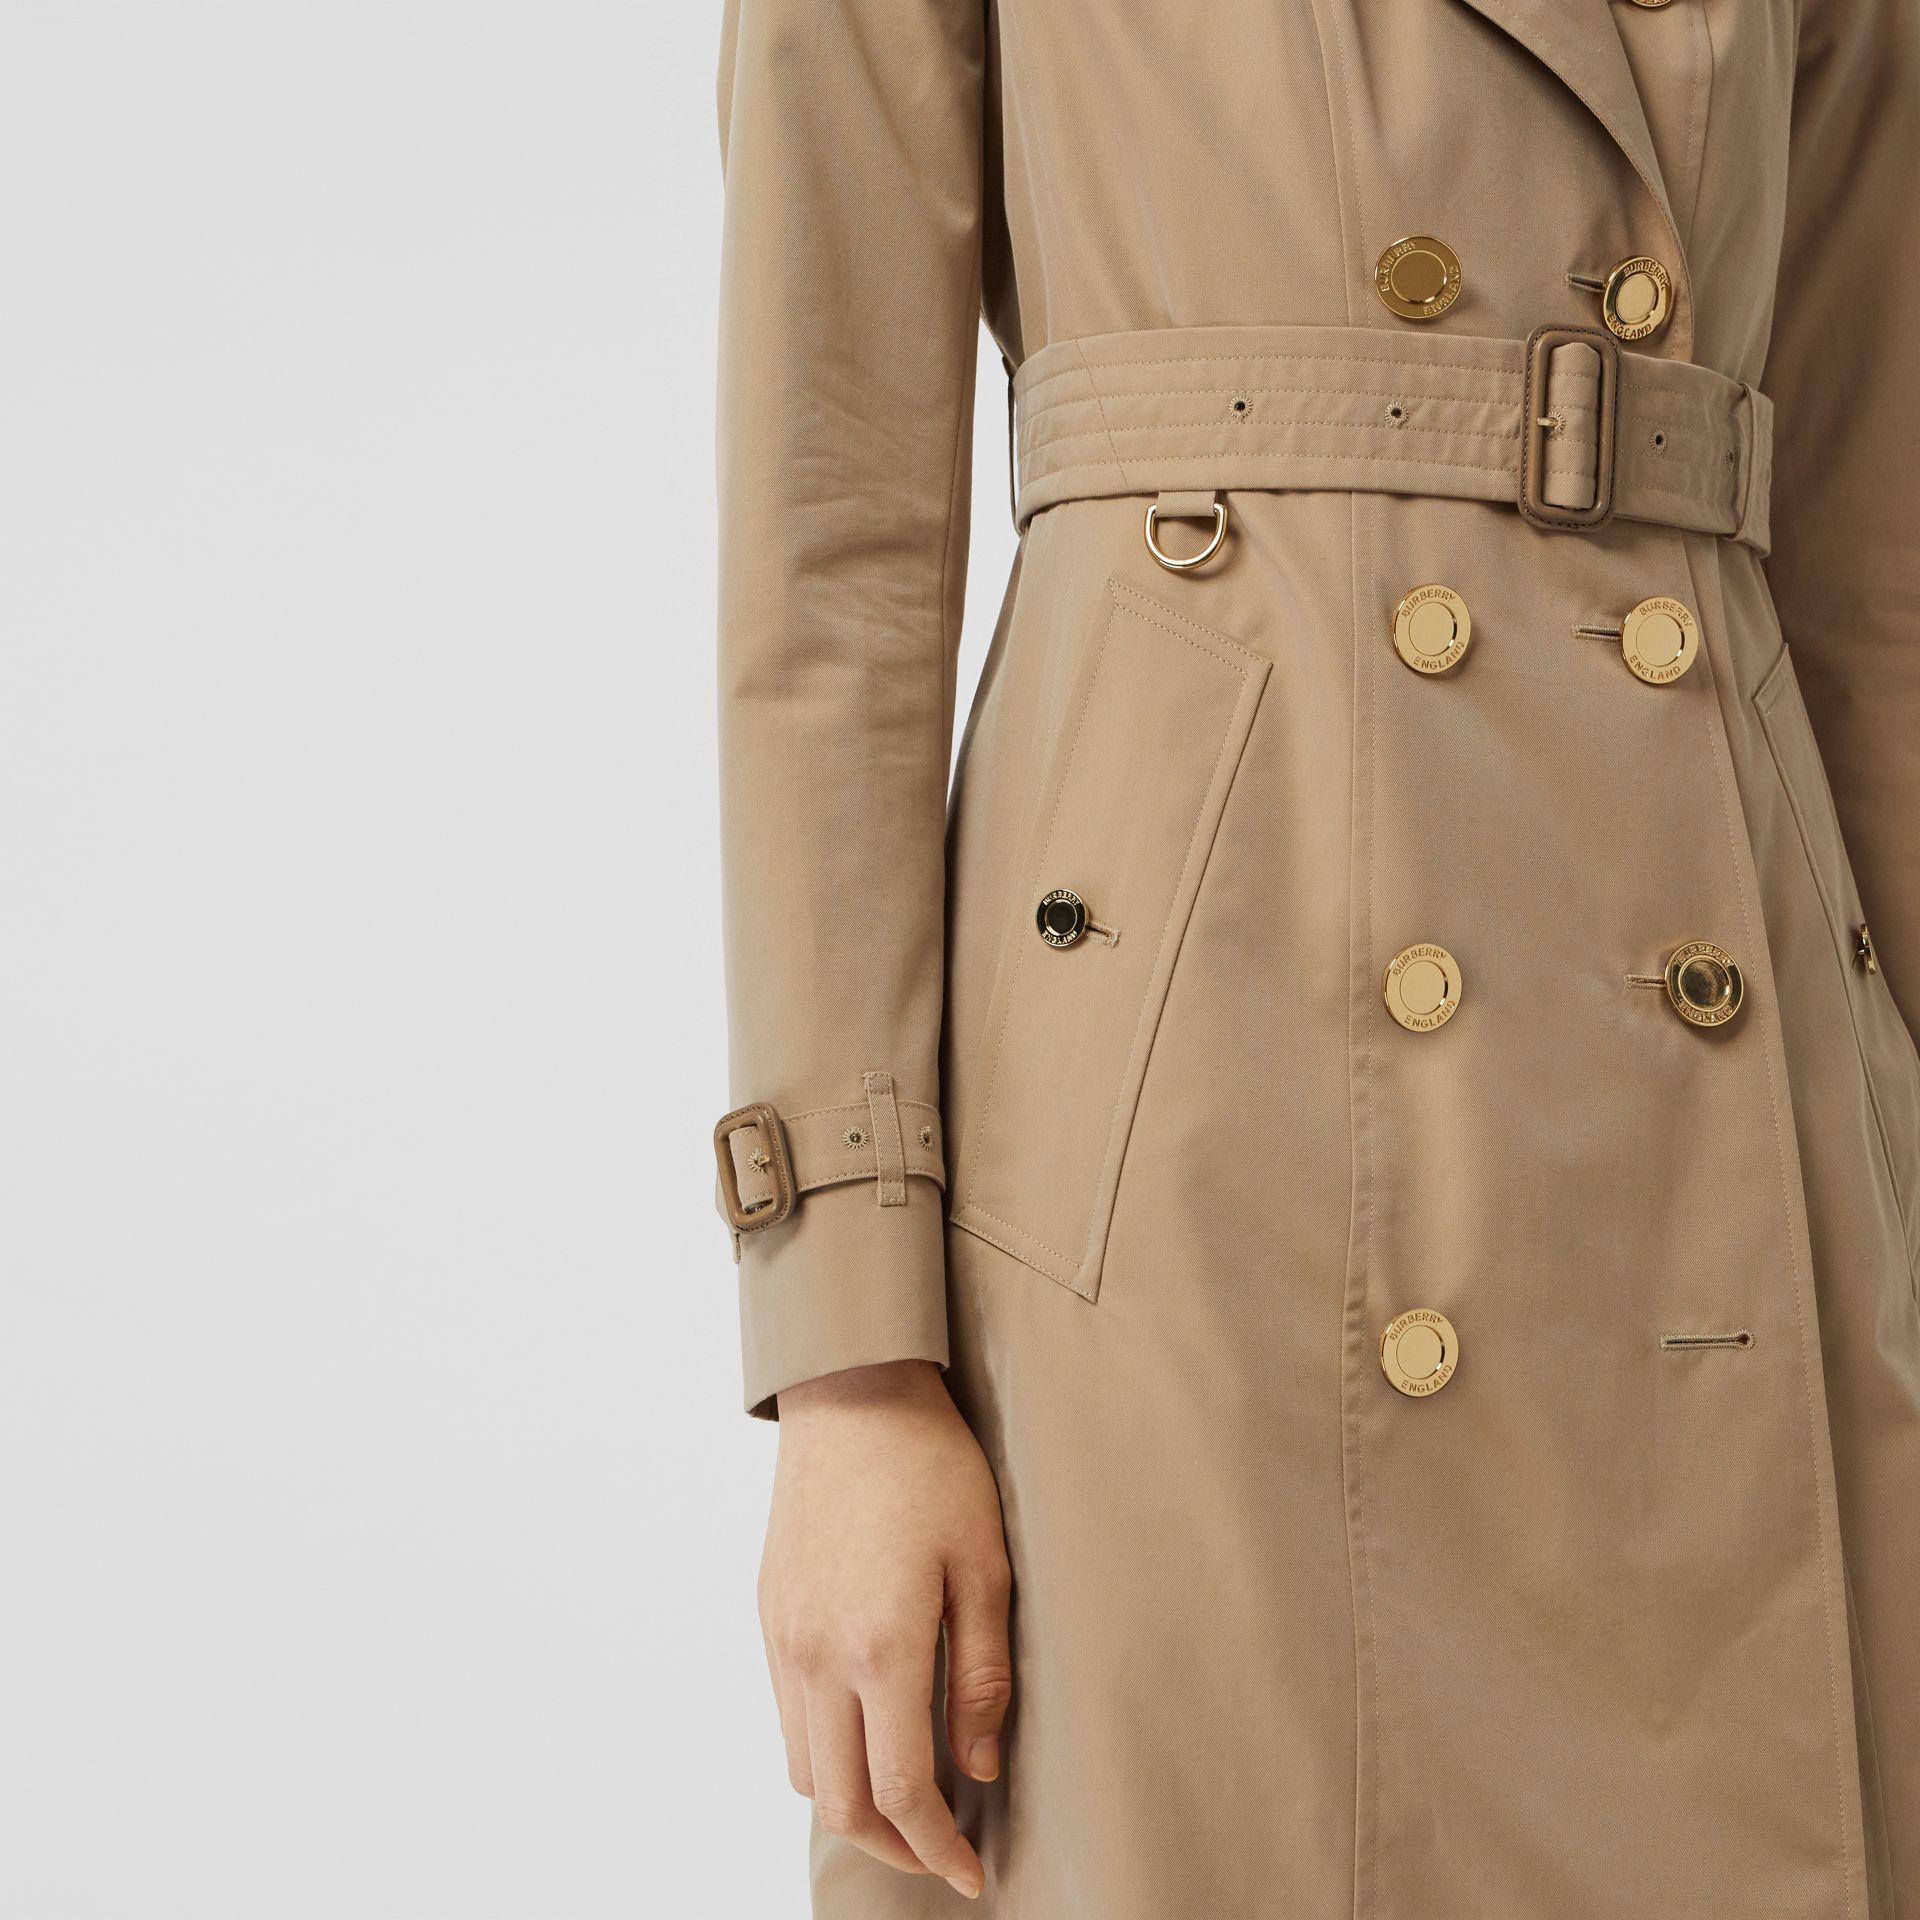 Burberry Gold Button Cotton Gabardine Trench Coat in Honey (Natural) - Lyst